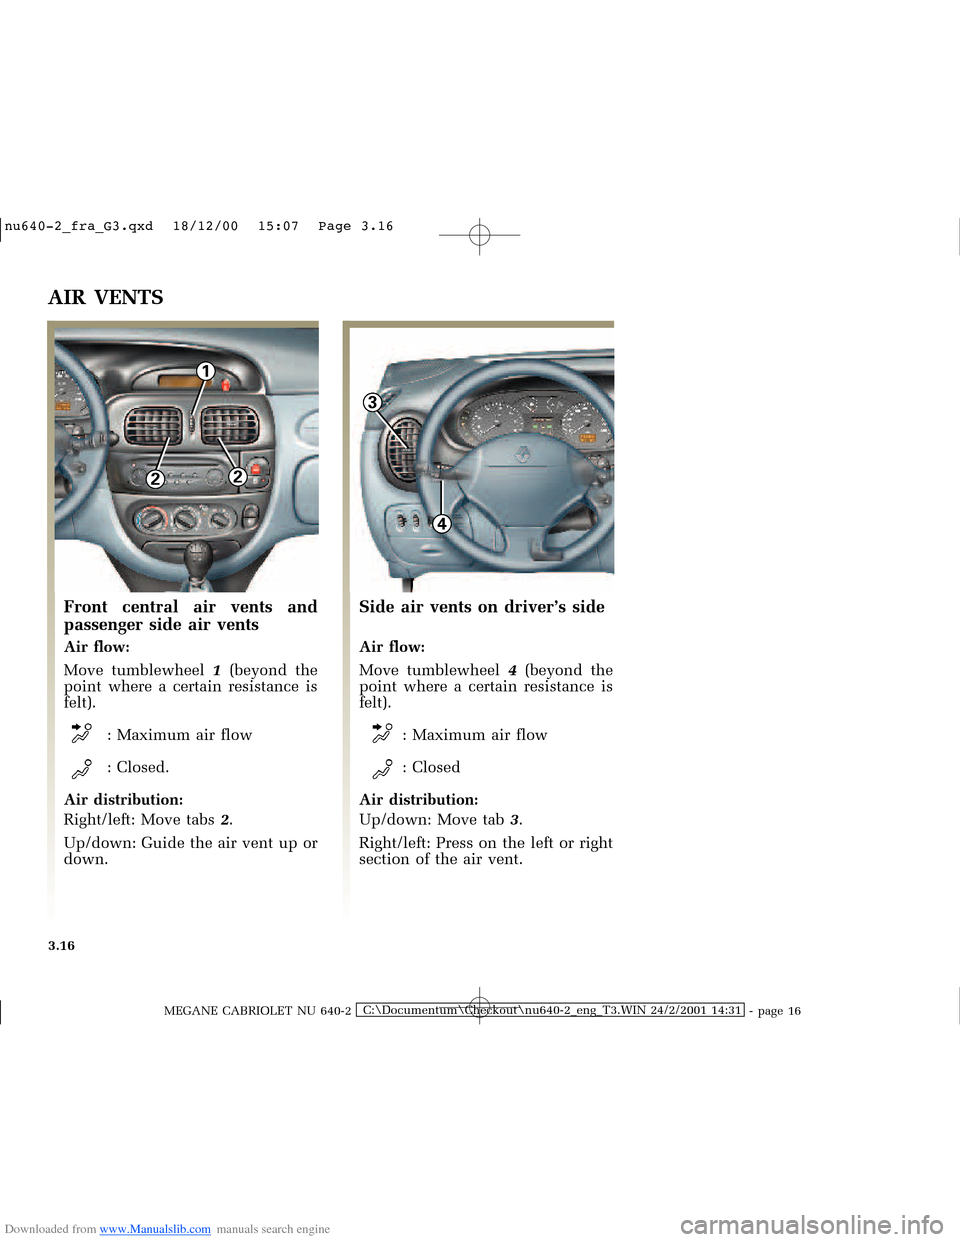 RENAULT MEGANE 2000 X64 / 1.G Owners Manual Downloaded from www.Manualslib.com manuals search engine 1
22
3
4
�Q�X������B�I�U�D�B�*���T�[�G� � ��������� � ������ � �3�D�J�H� ����
MEGANE CABRIOLET NU 640-2C:\Docume